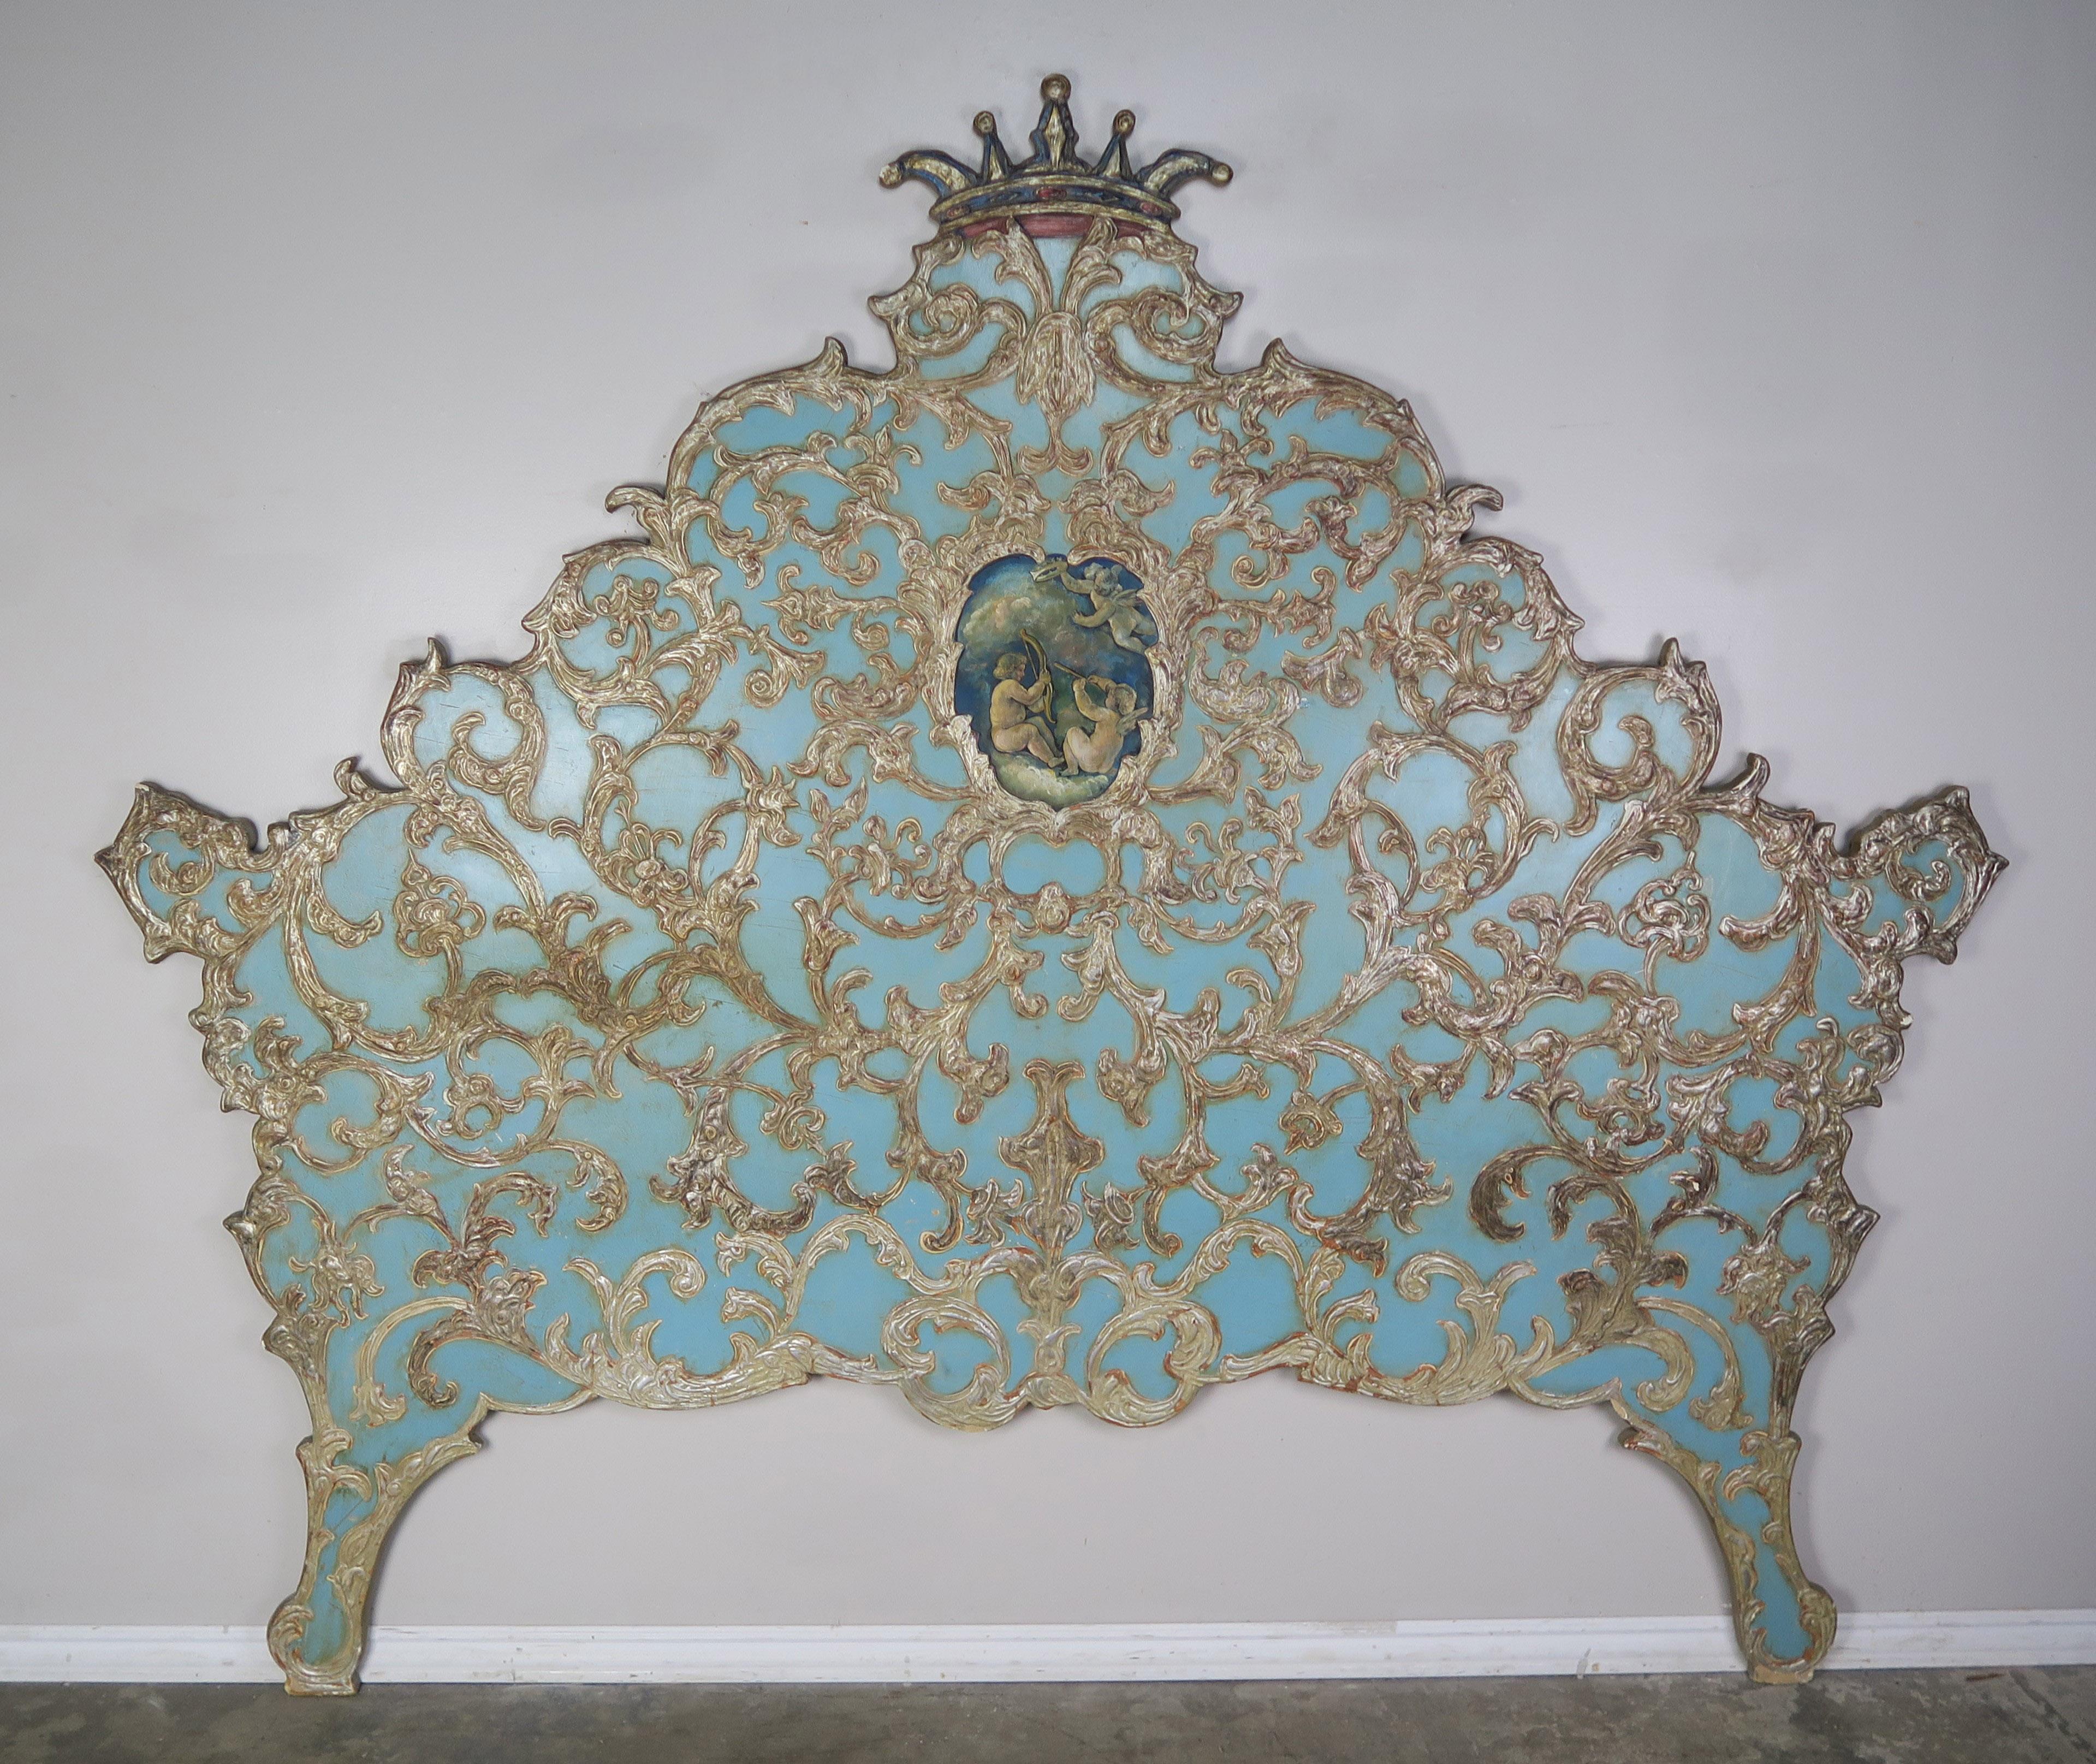 Italian 1930s blue painted headboard with raised gilt acanthus leaf design throughout. Beautiful fine painted puttis in center cartouche. Crown depicted at top of headboard as well.